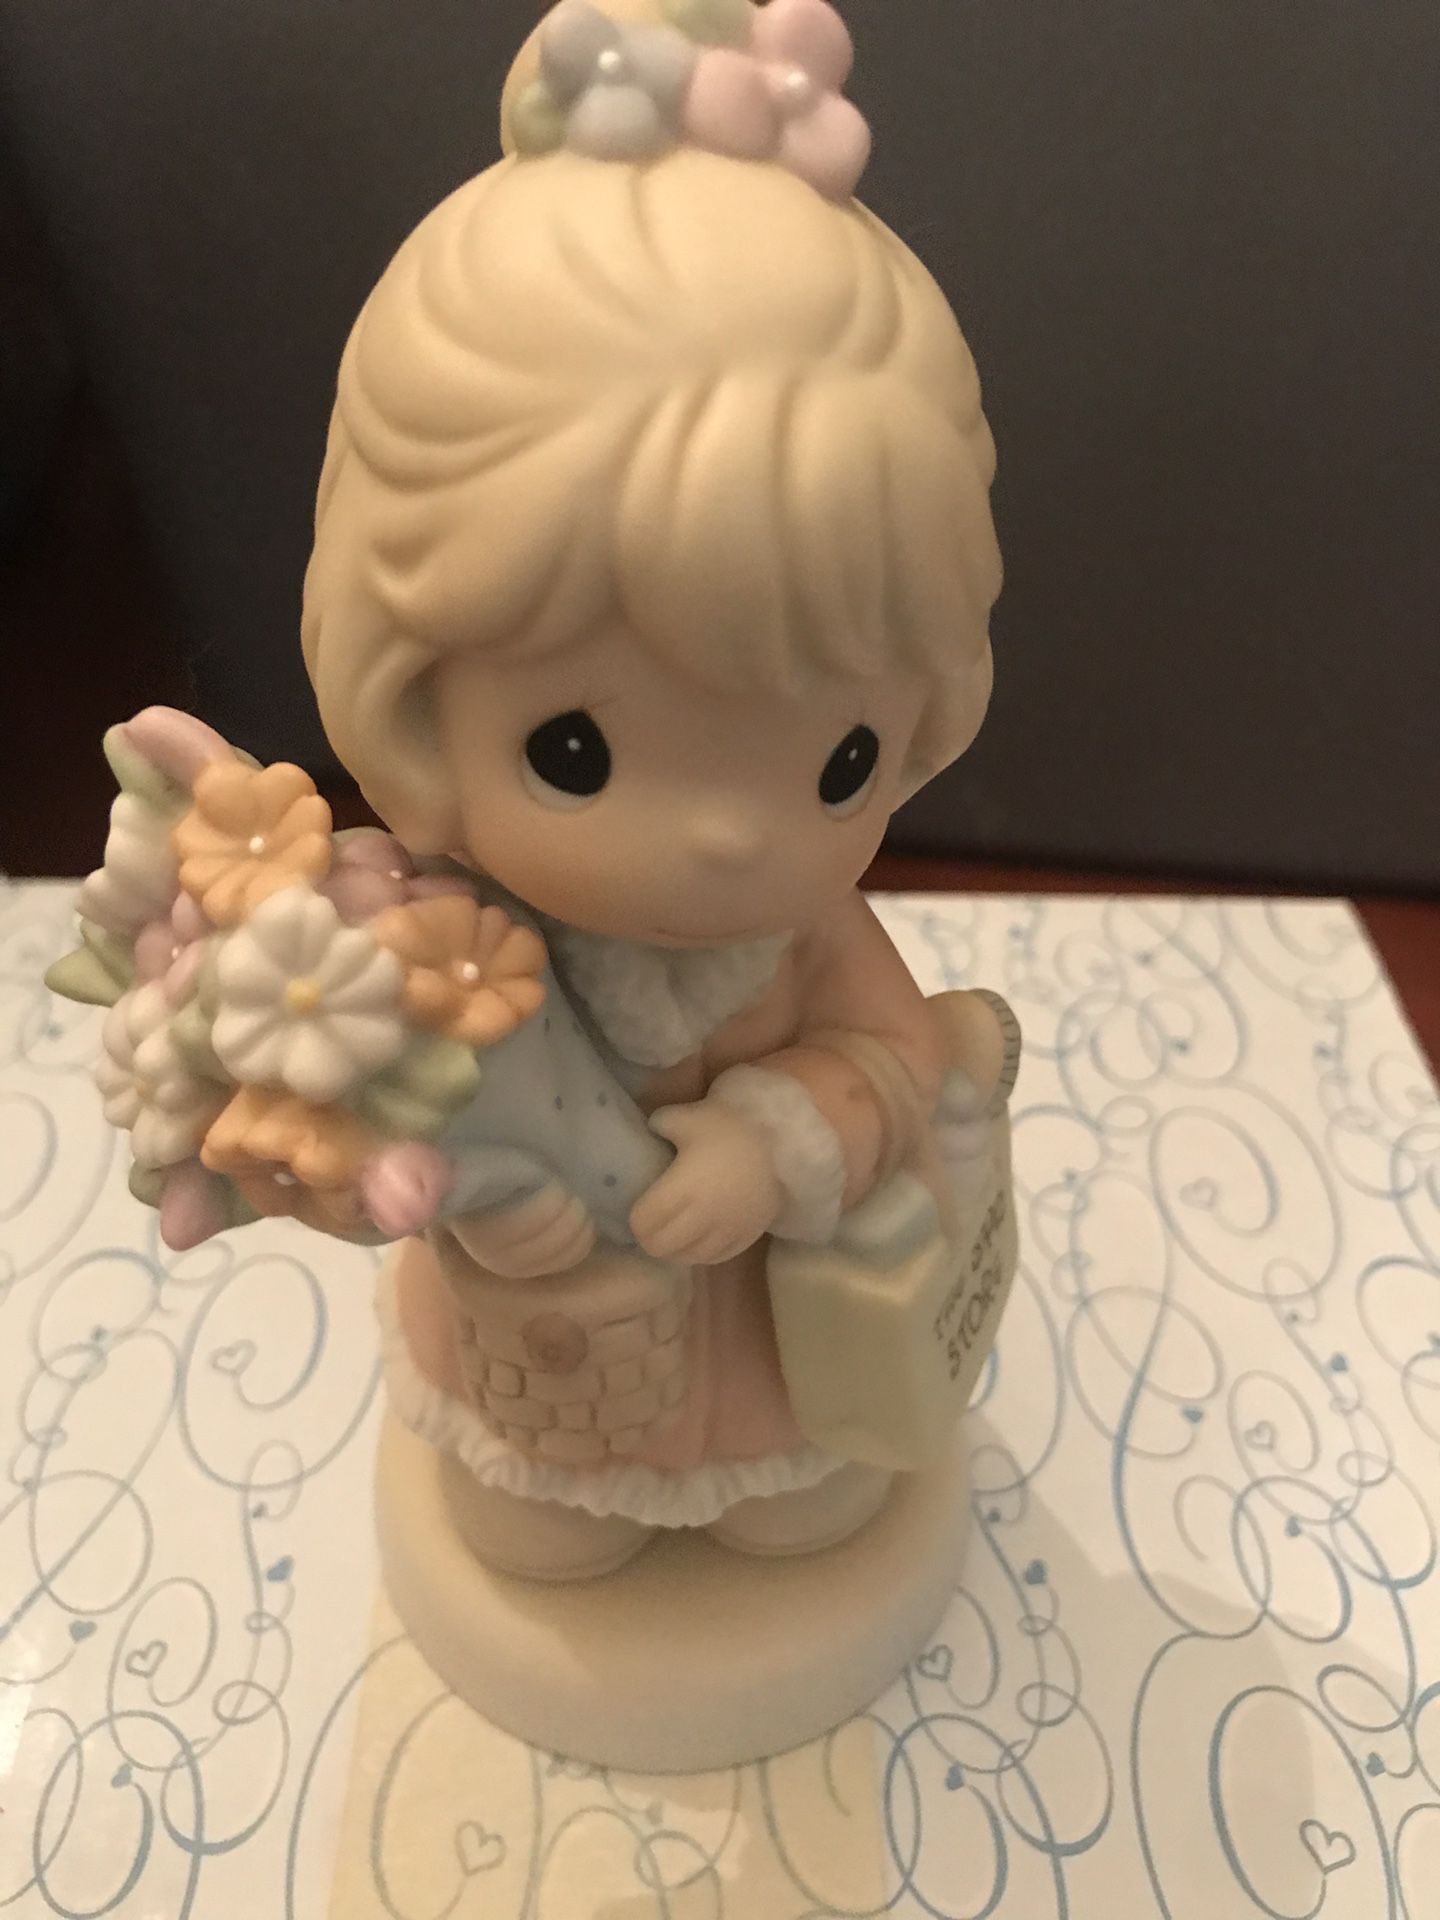 Precious Moments “It’s time to bless your own day” figurine